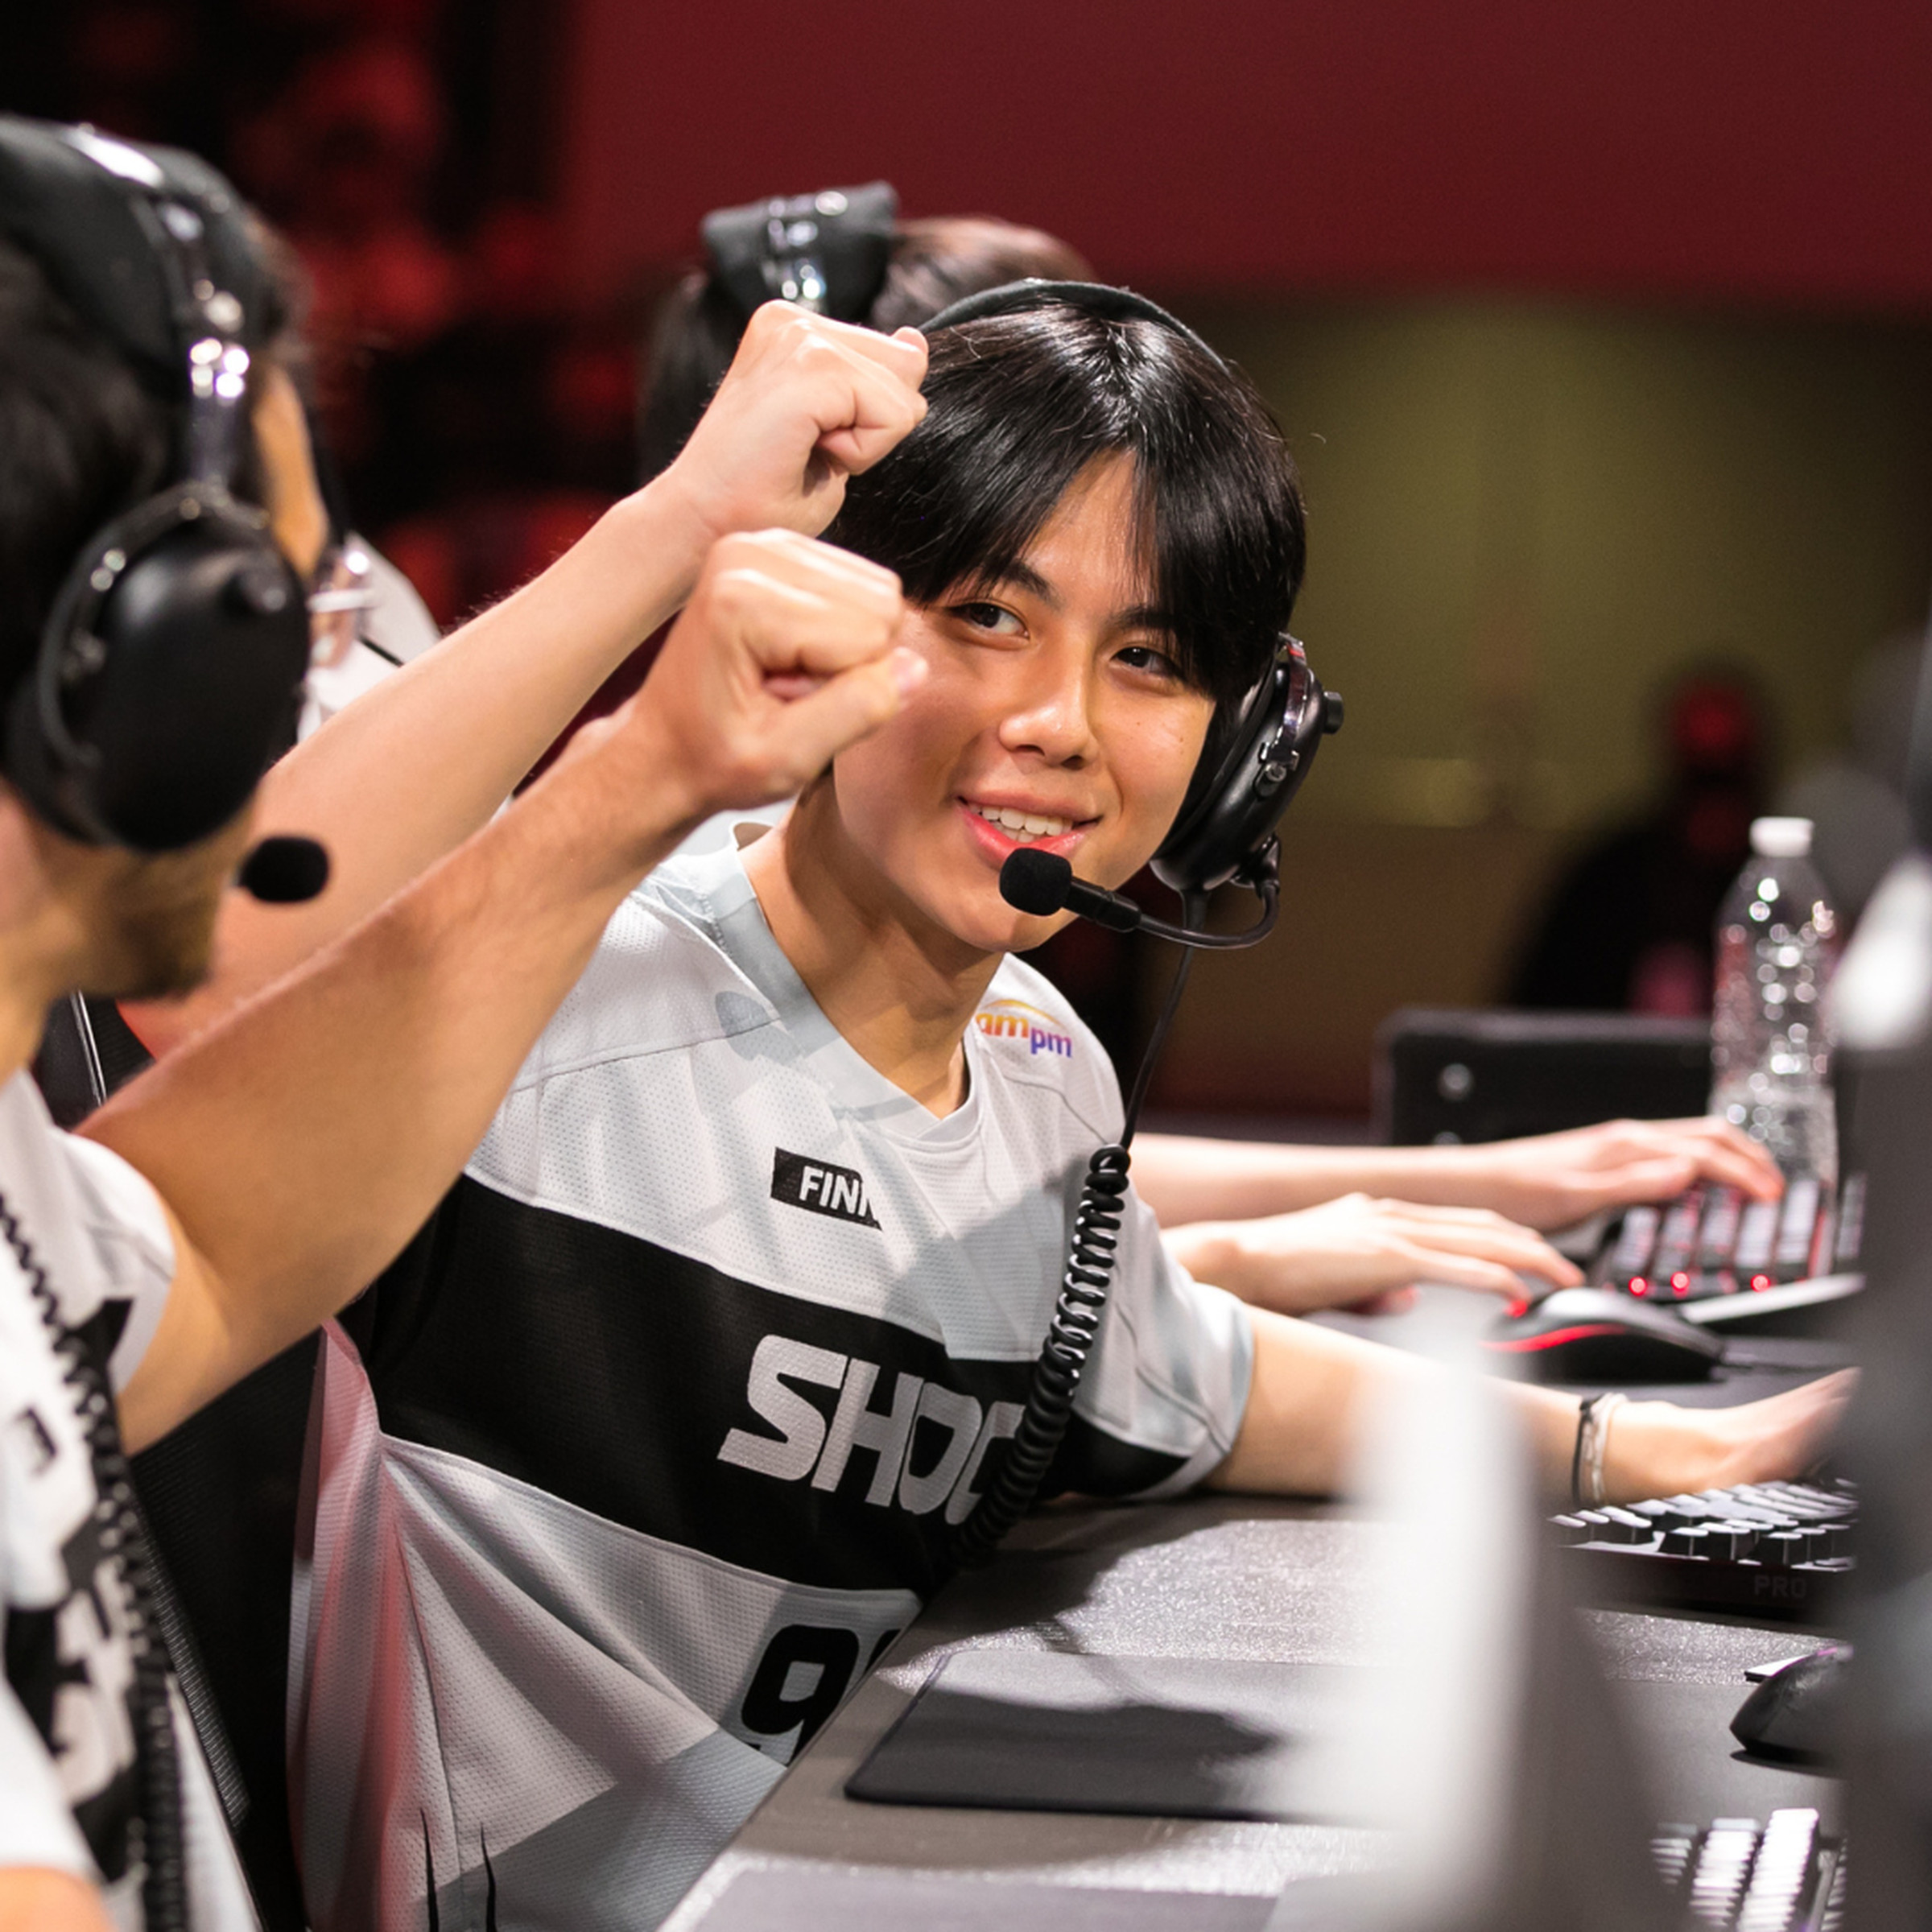 Photo from the Overwatch League 2022 Grand Finals featuring Se-jin “FINN” Oh fist-bumping a teammate